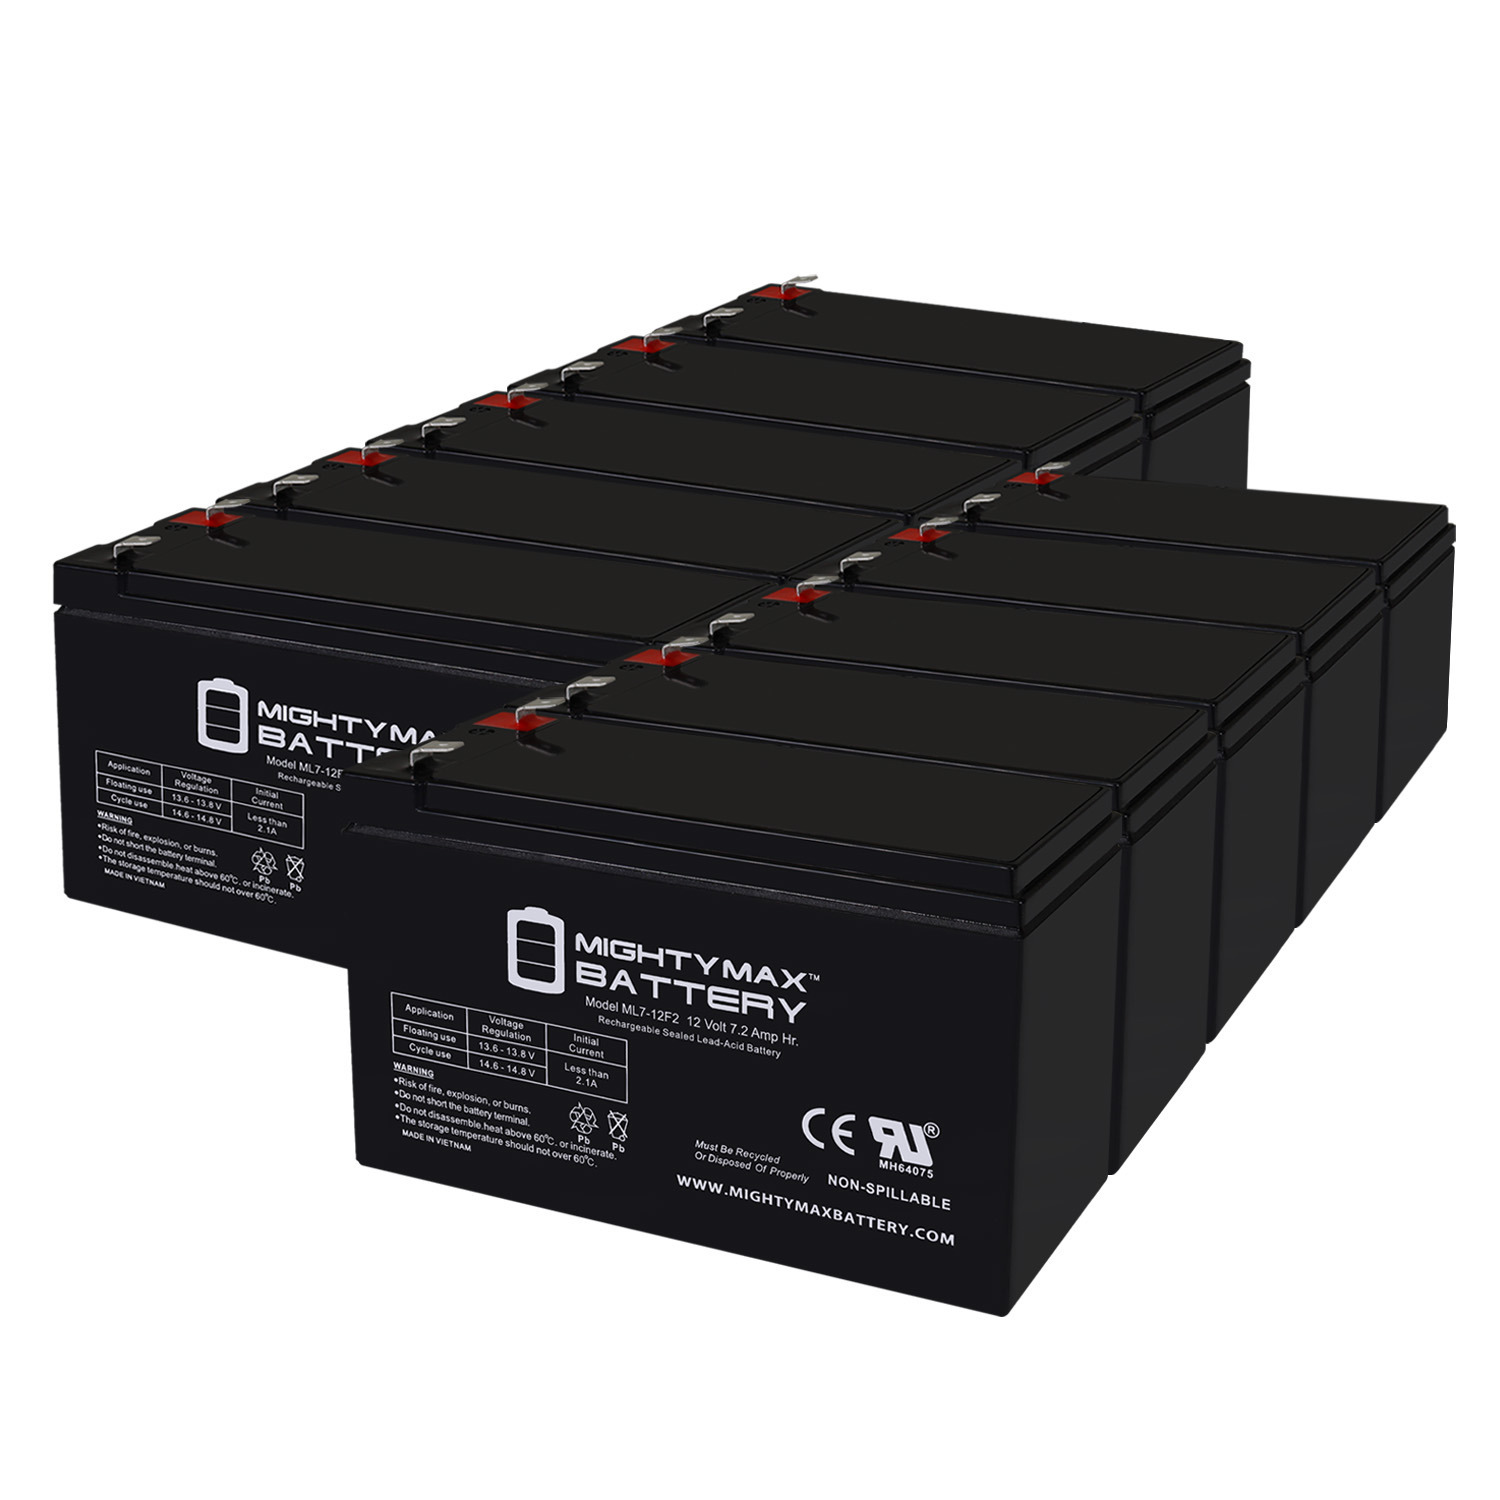 12V 7Ah F2 Replacement Battery for Hps12-28w - 10 Pack